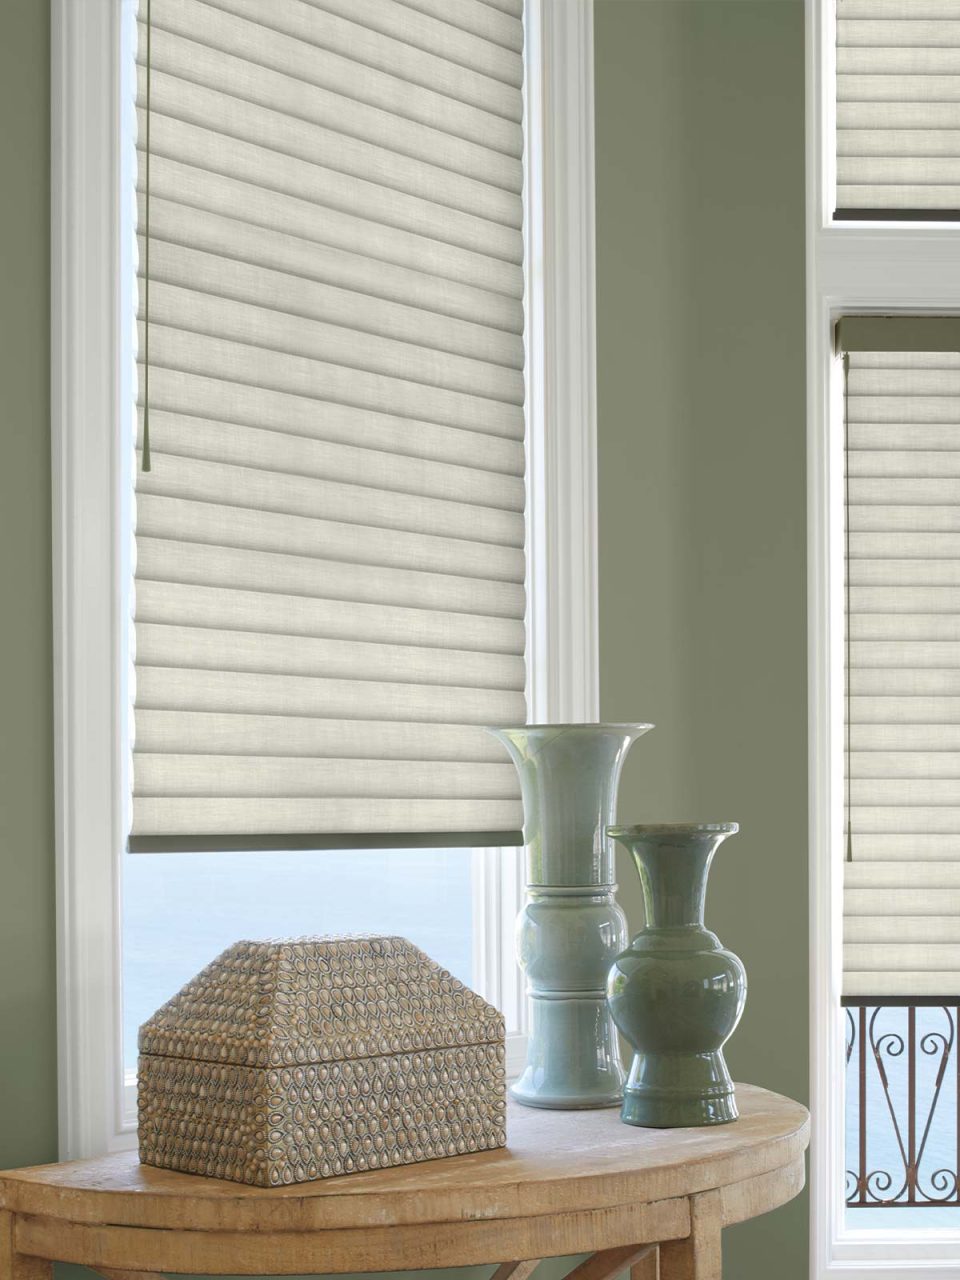 Hunter Douglas Shades with Soft Touch Motorization Operating System